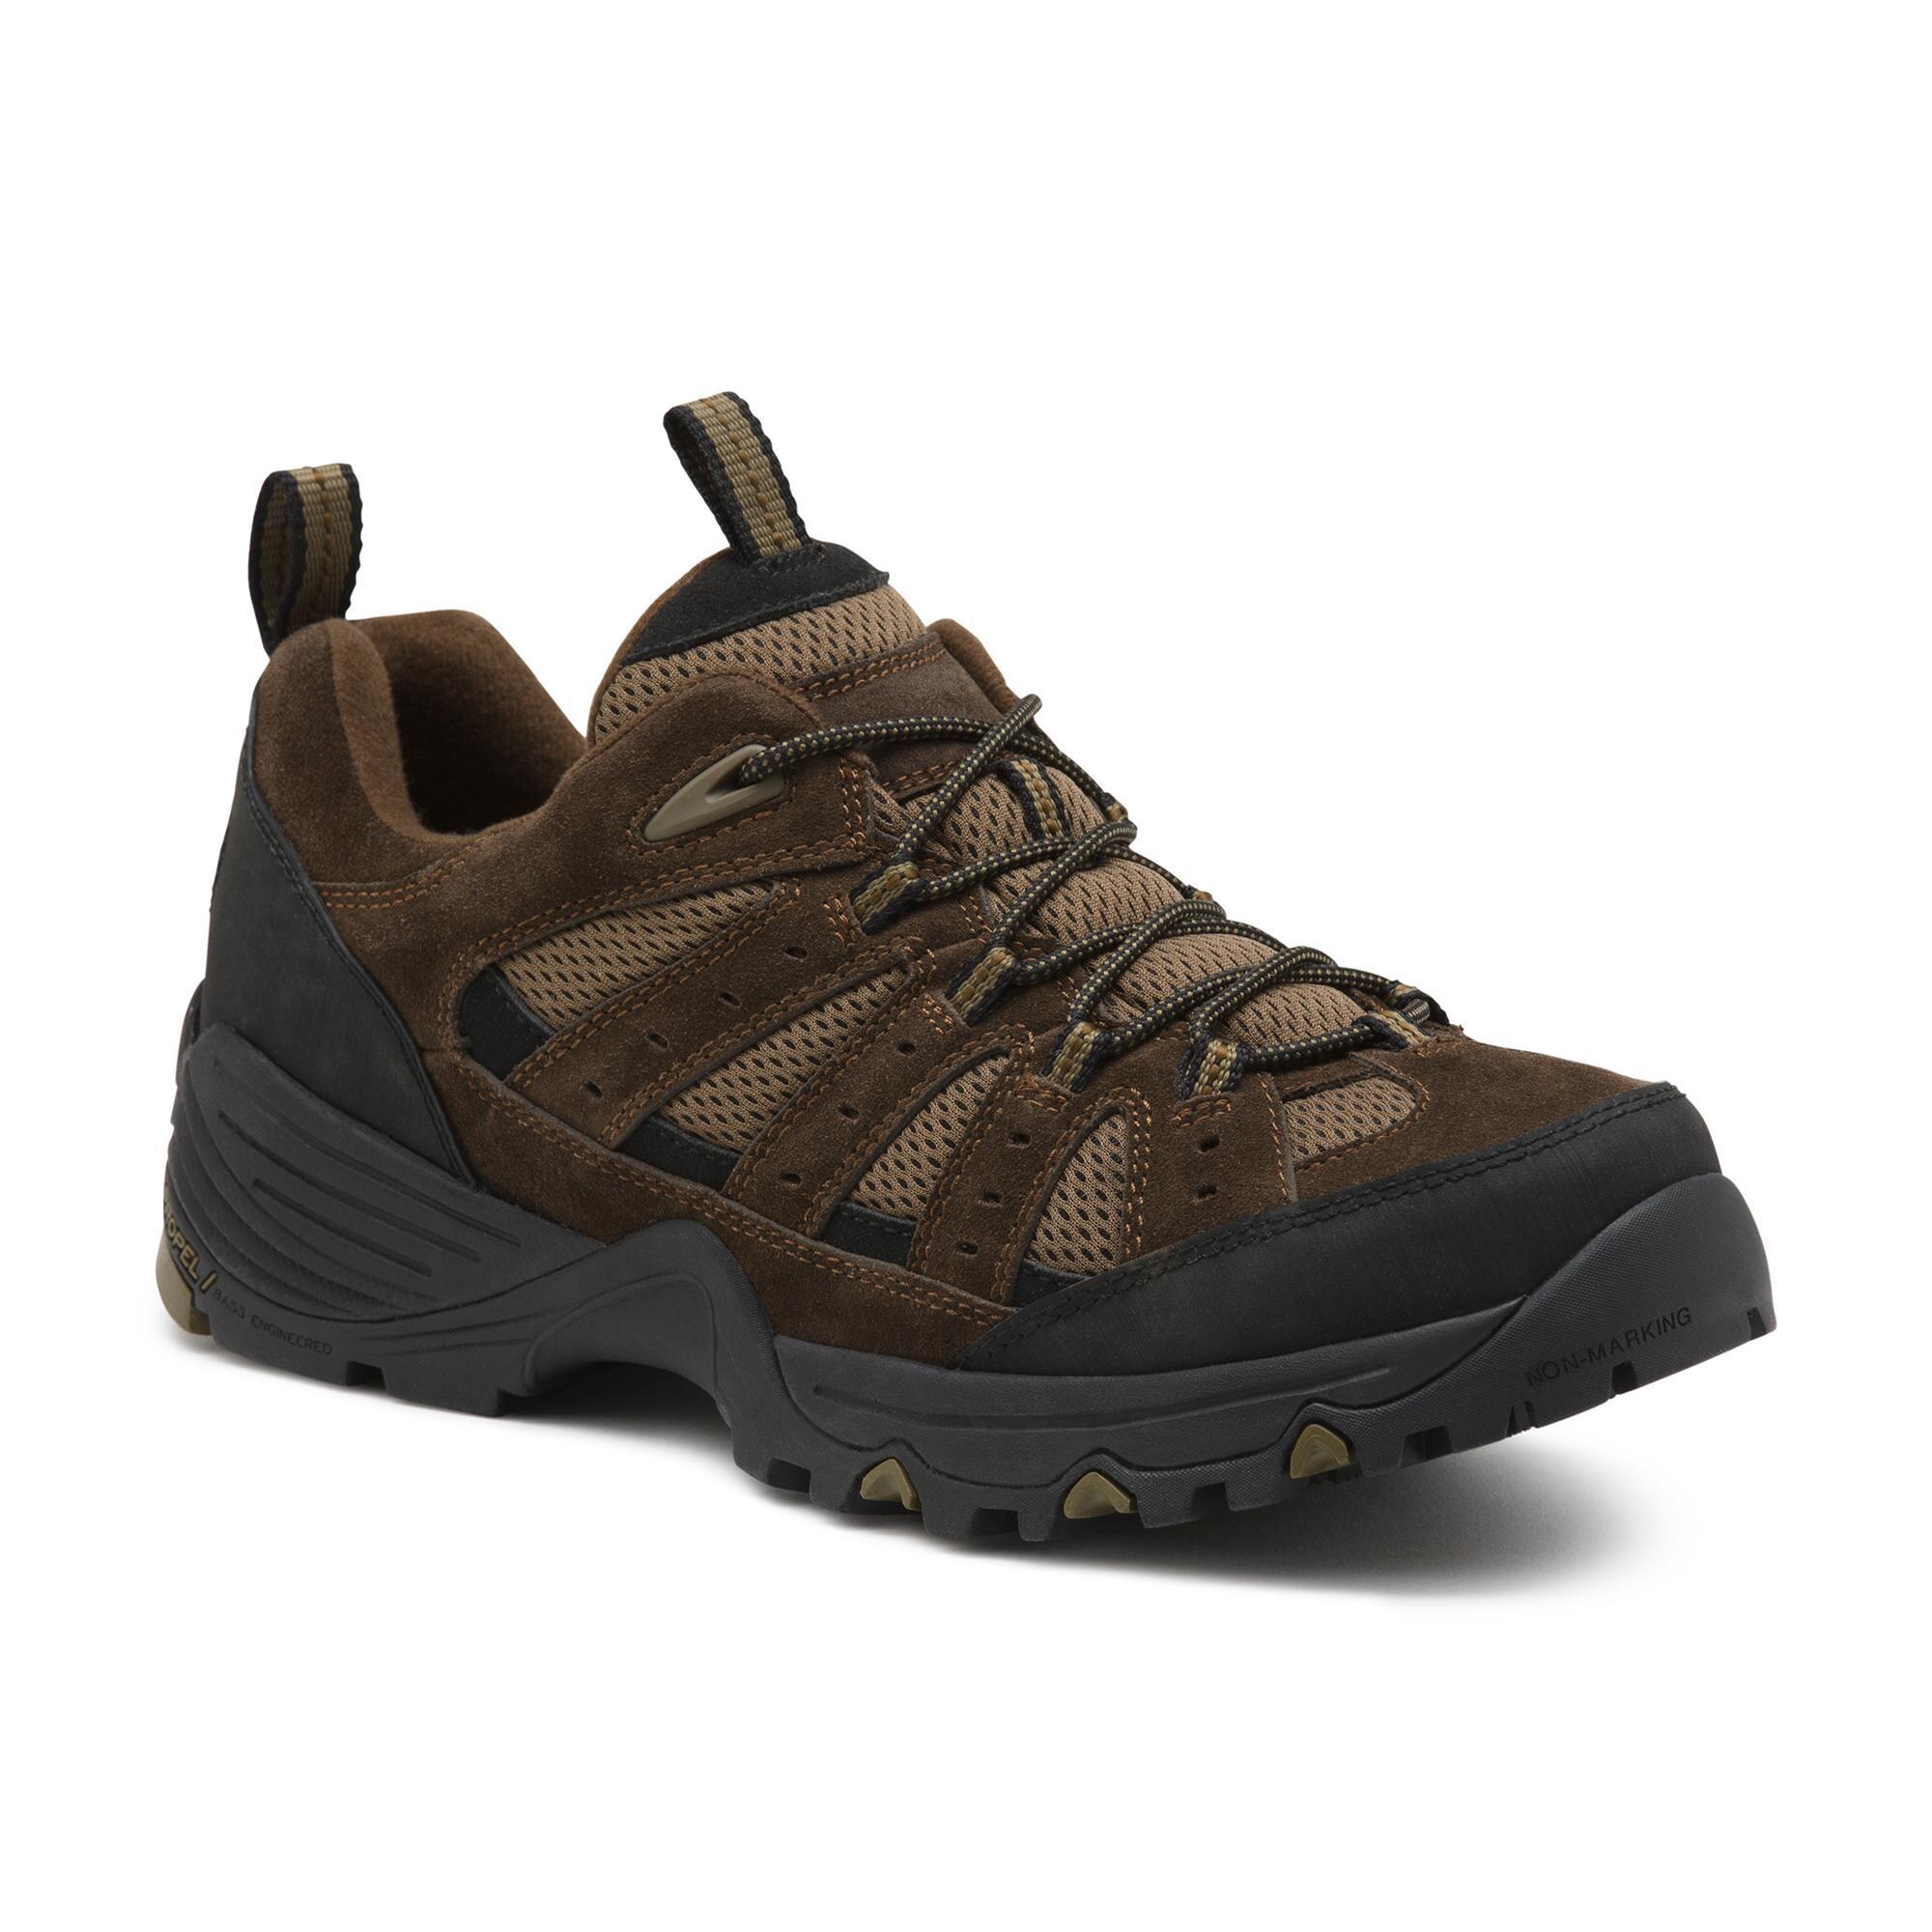 Lyst - G.H.BASS Propel Trail Hiker in Brown for Men